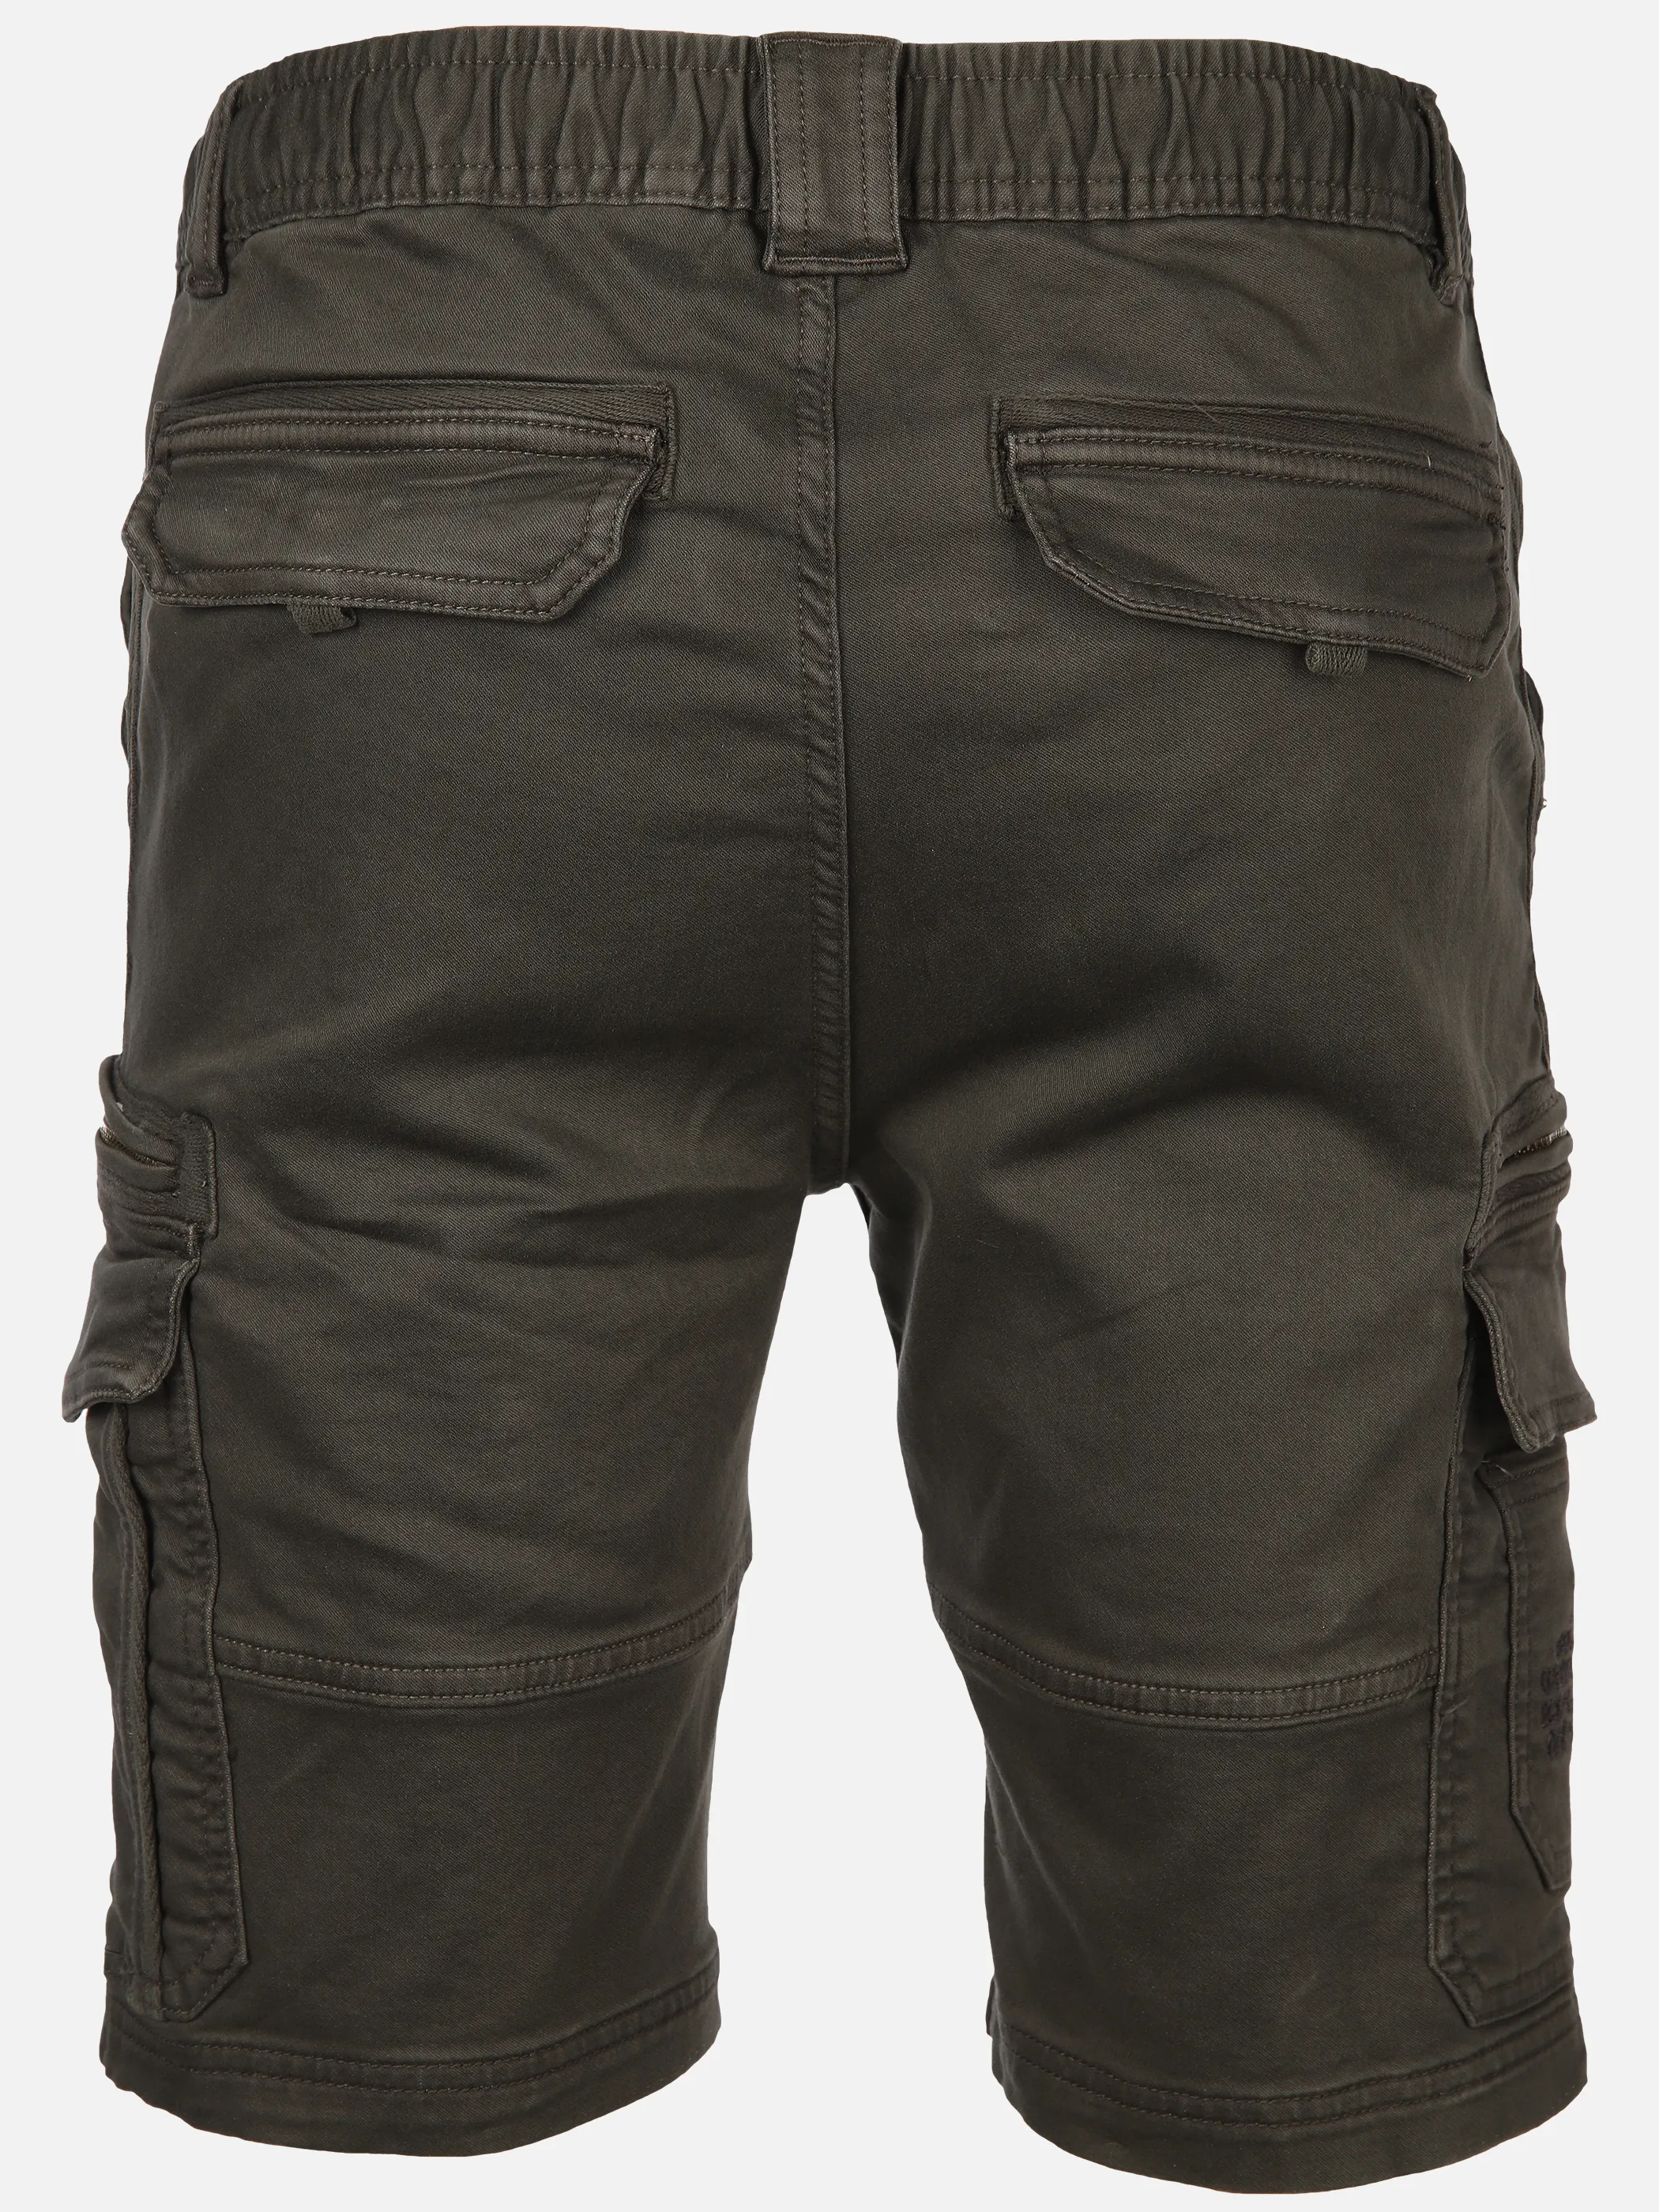 Southern Territory He. Cargoshort Stretch Oliv 892287 OLIVE 2